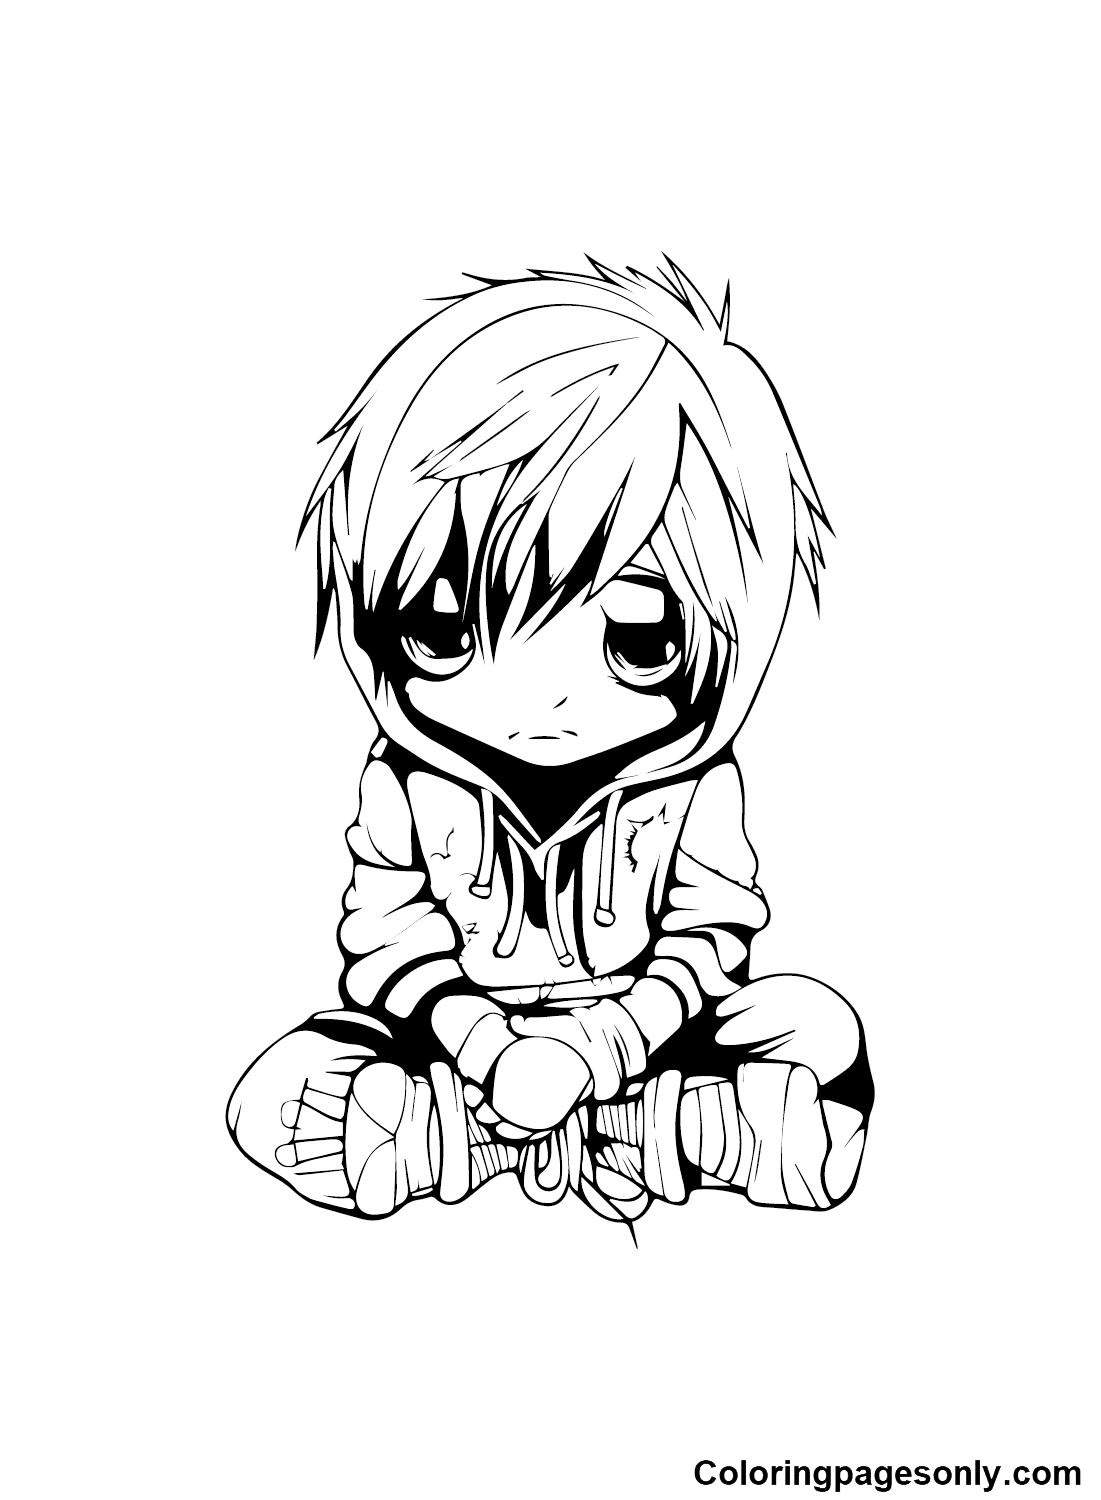 Emo Coloring Pages - Coloring Pages For Kids And Adults